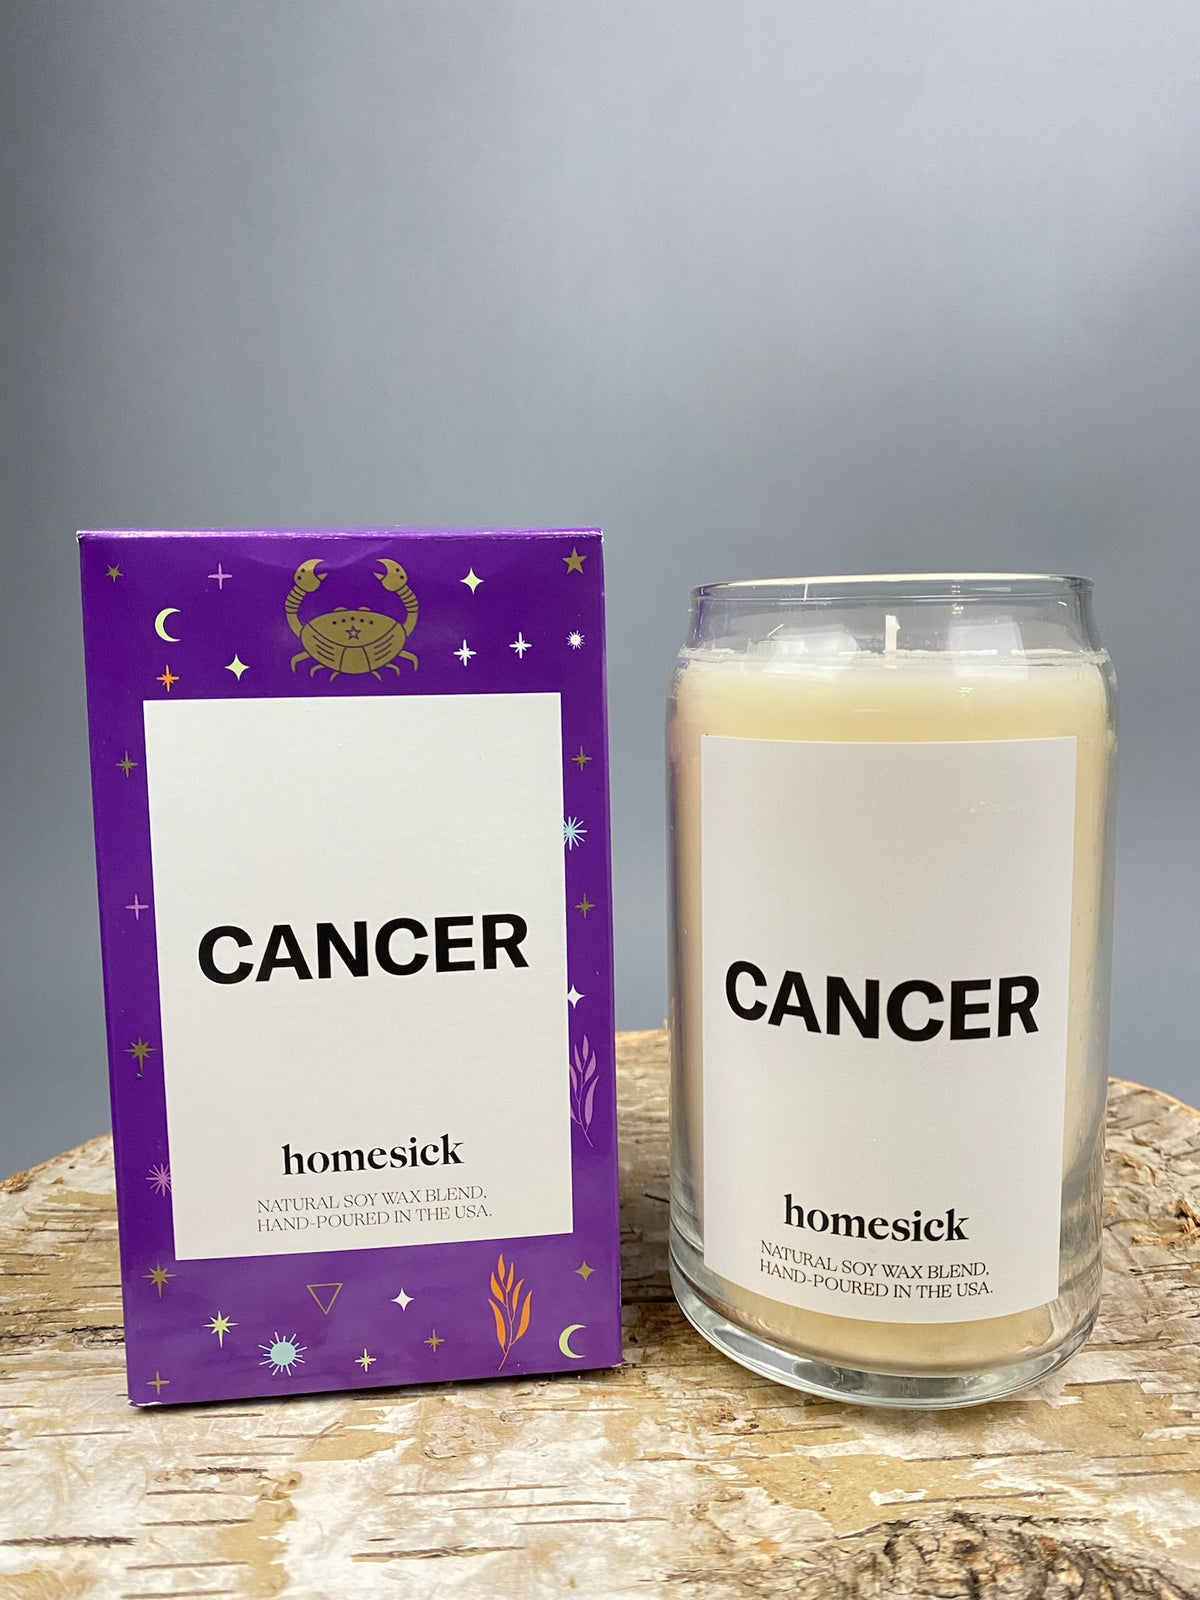 Homesick Cancer candle - Trendy Candles at Lush Fashion Lounge Boutique in Oklahoma City